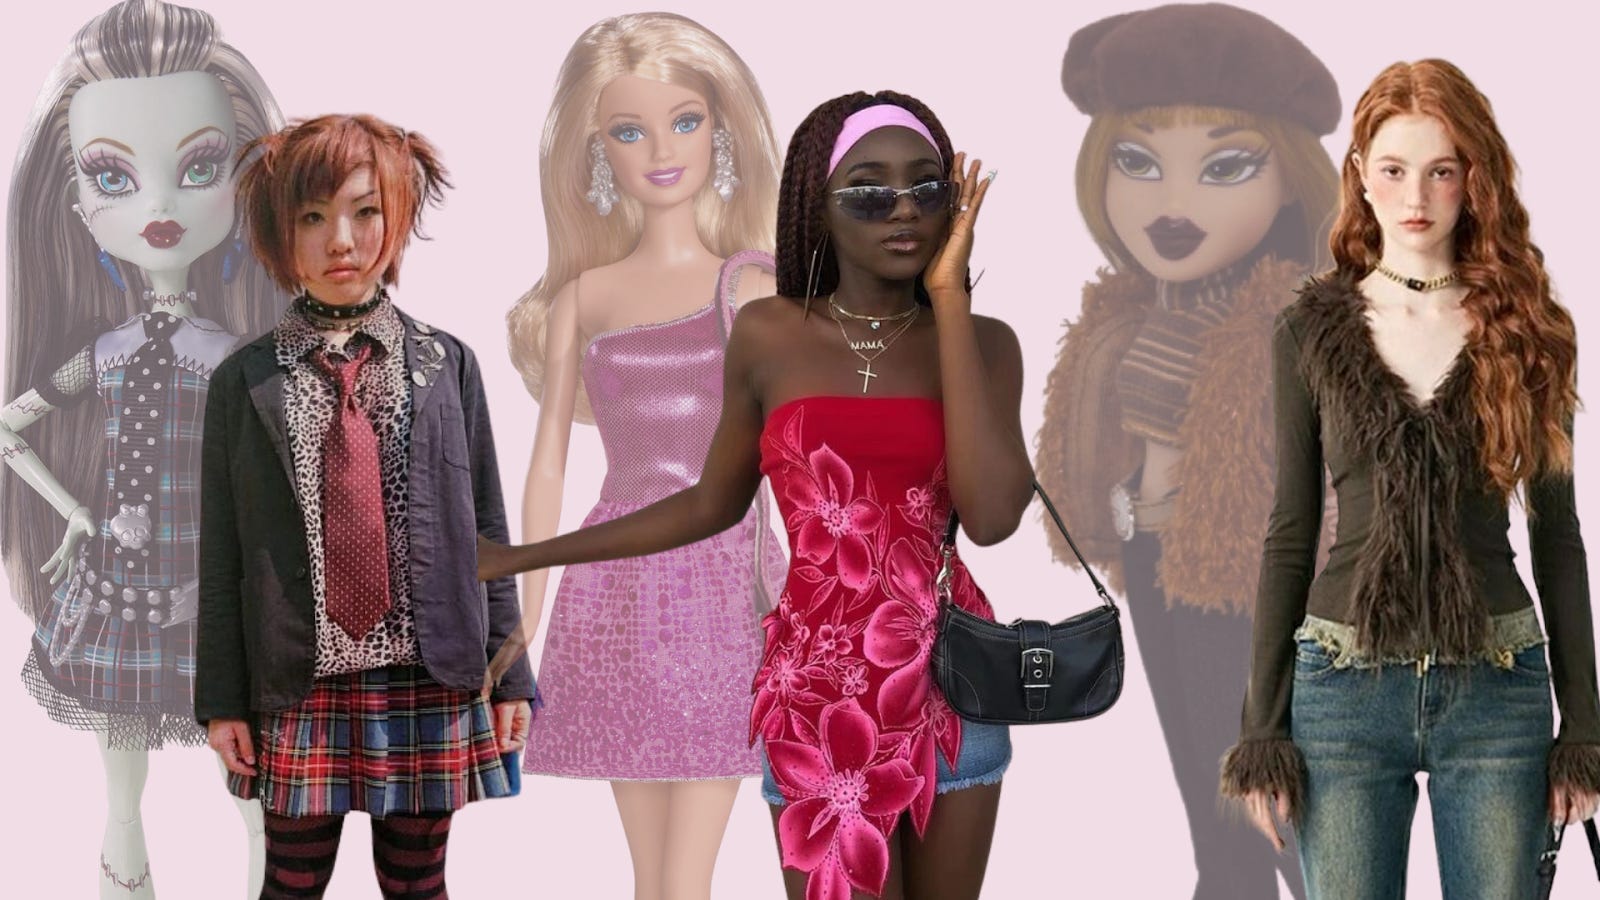 Bratz are the true style icons of Gen Z